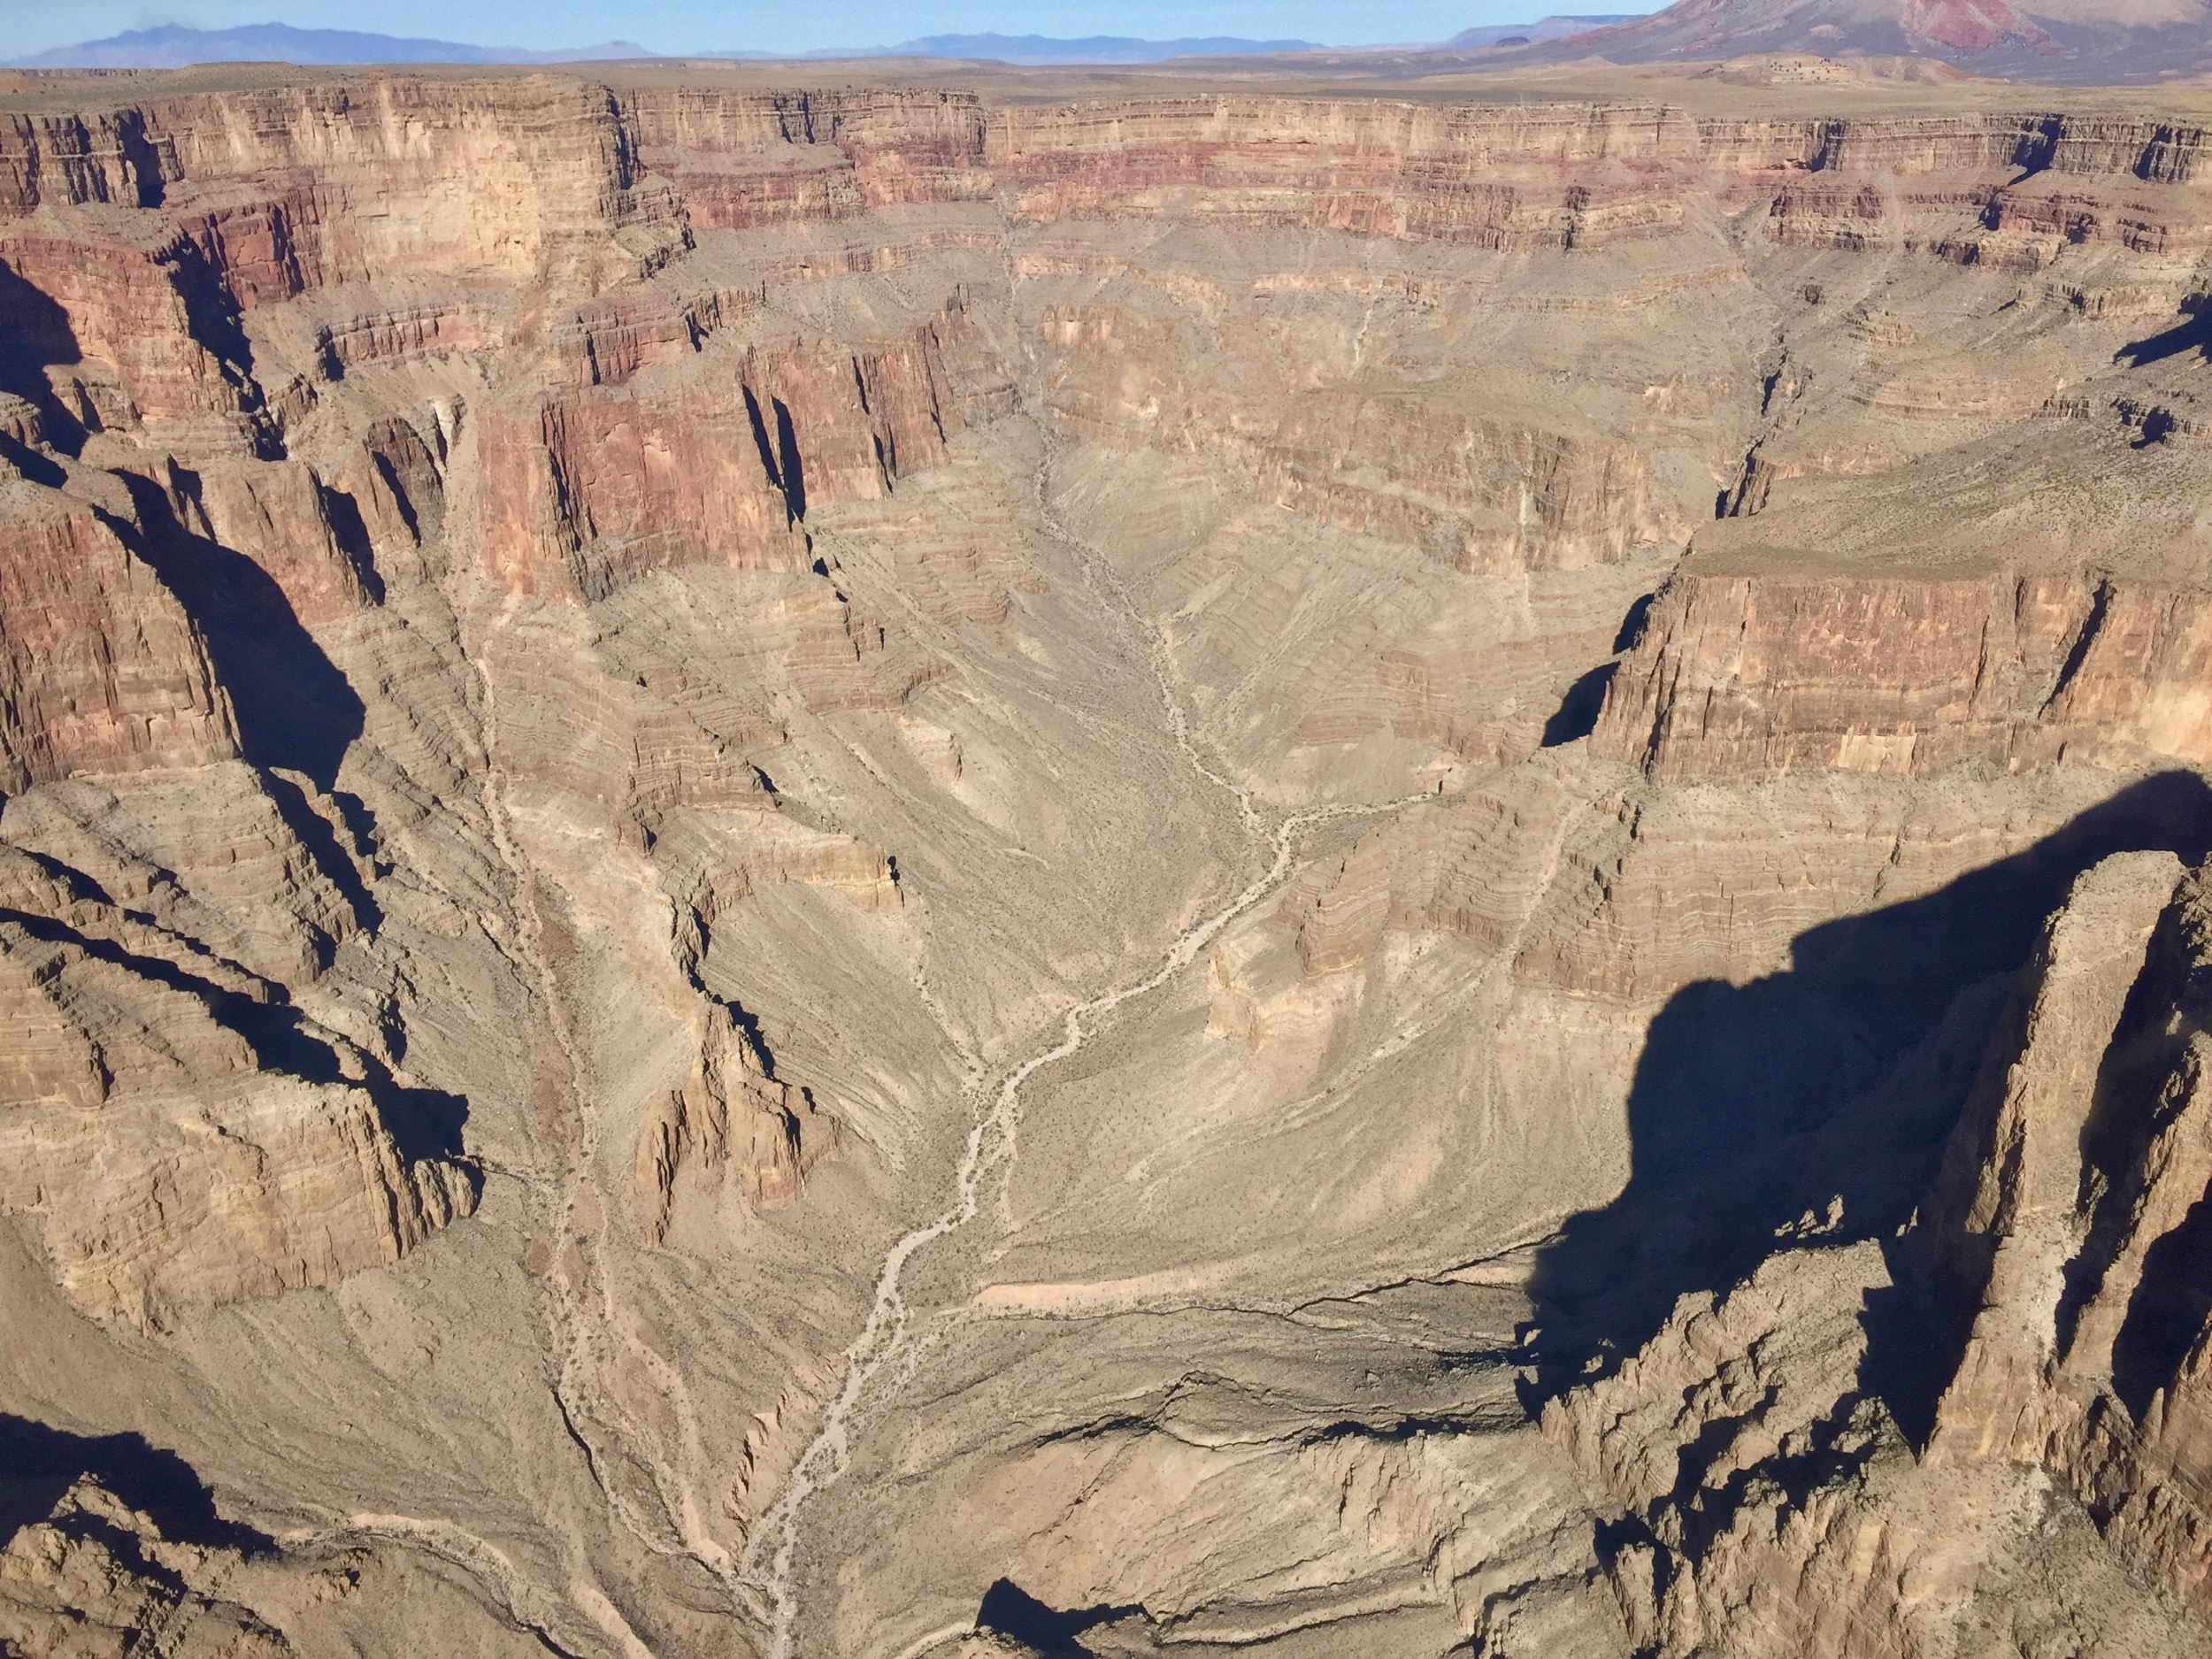 The Grand Canyon itself consists of many small canyons